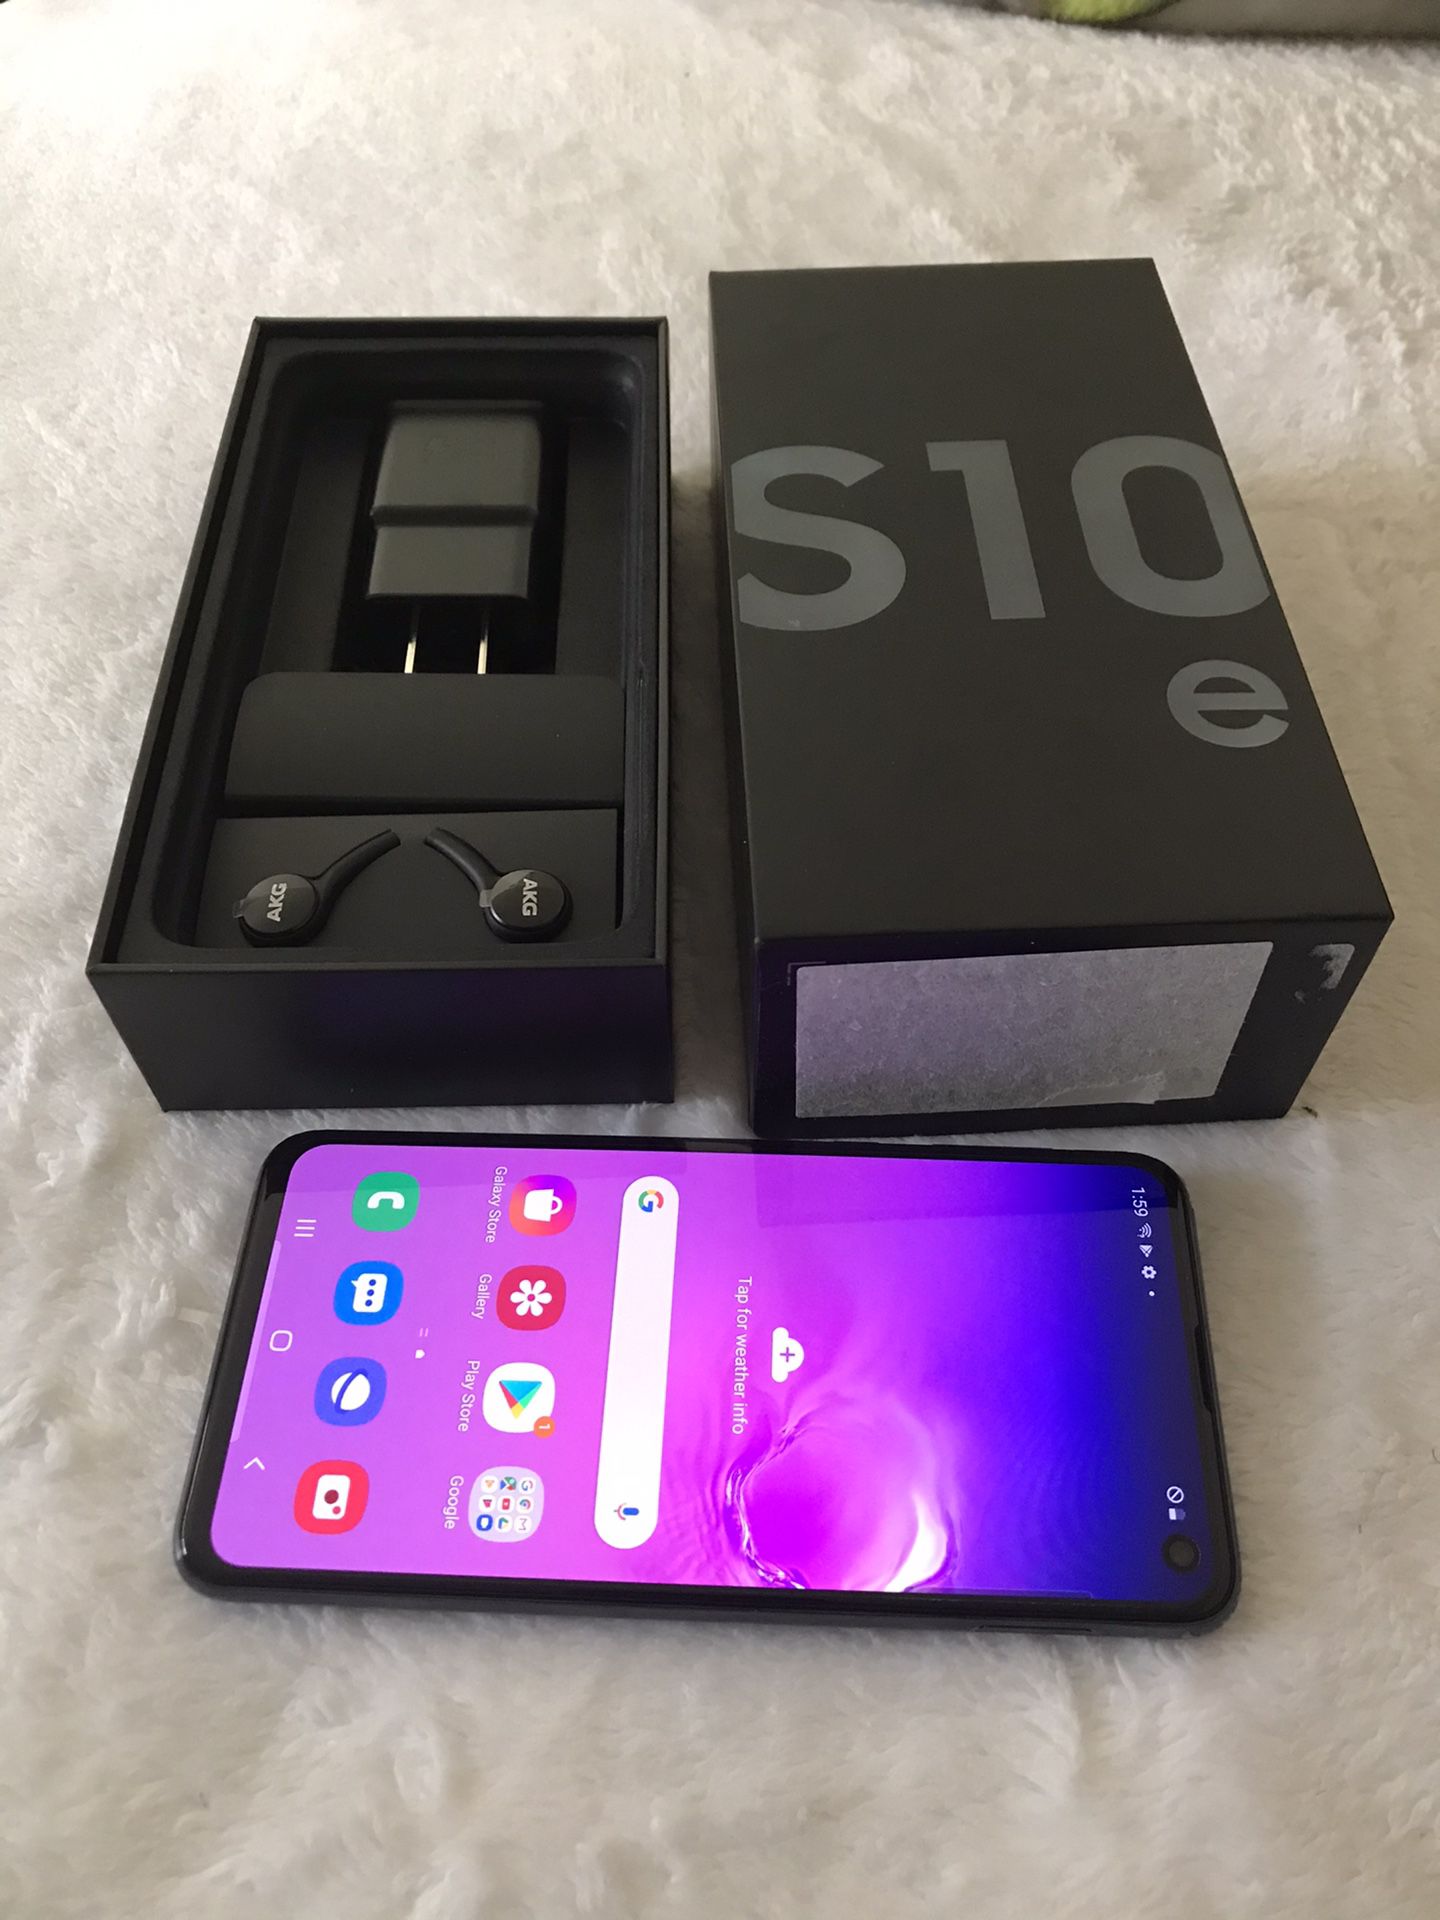 Galaxy s10e 128gb Unlocked For Any Carrier $325 Firm No Trade, New Condition,NO TRADE